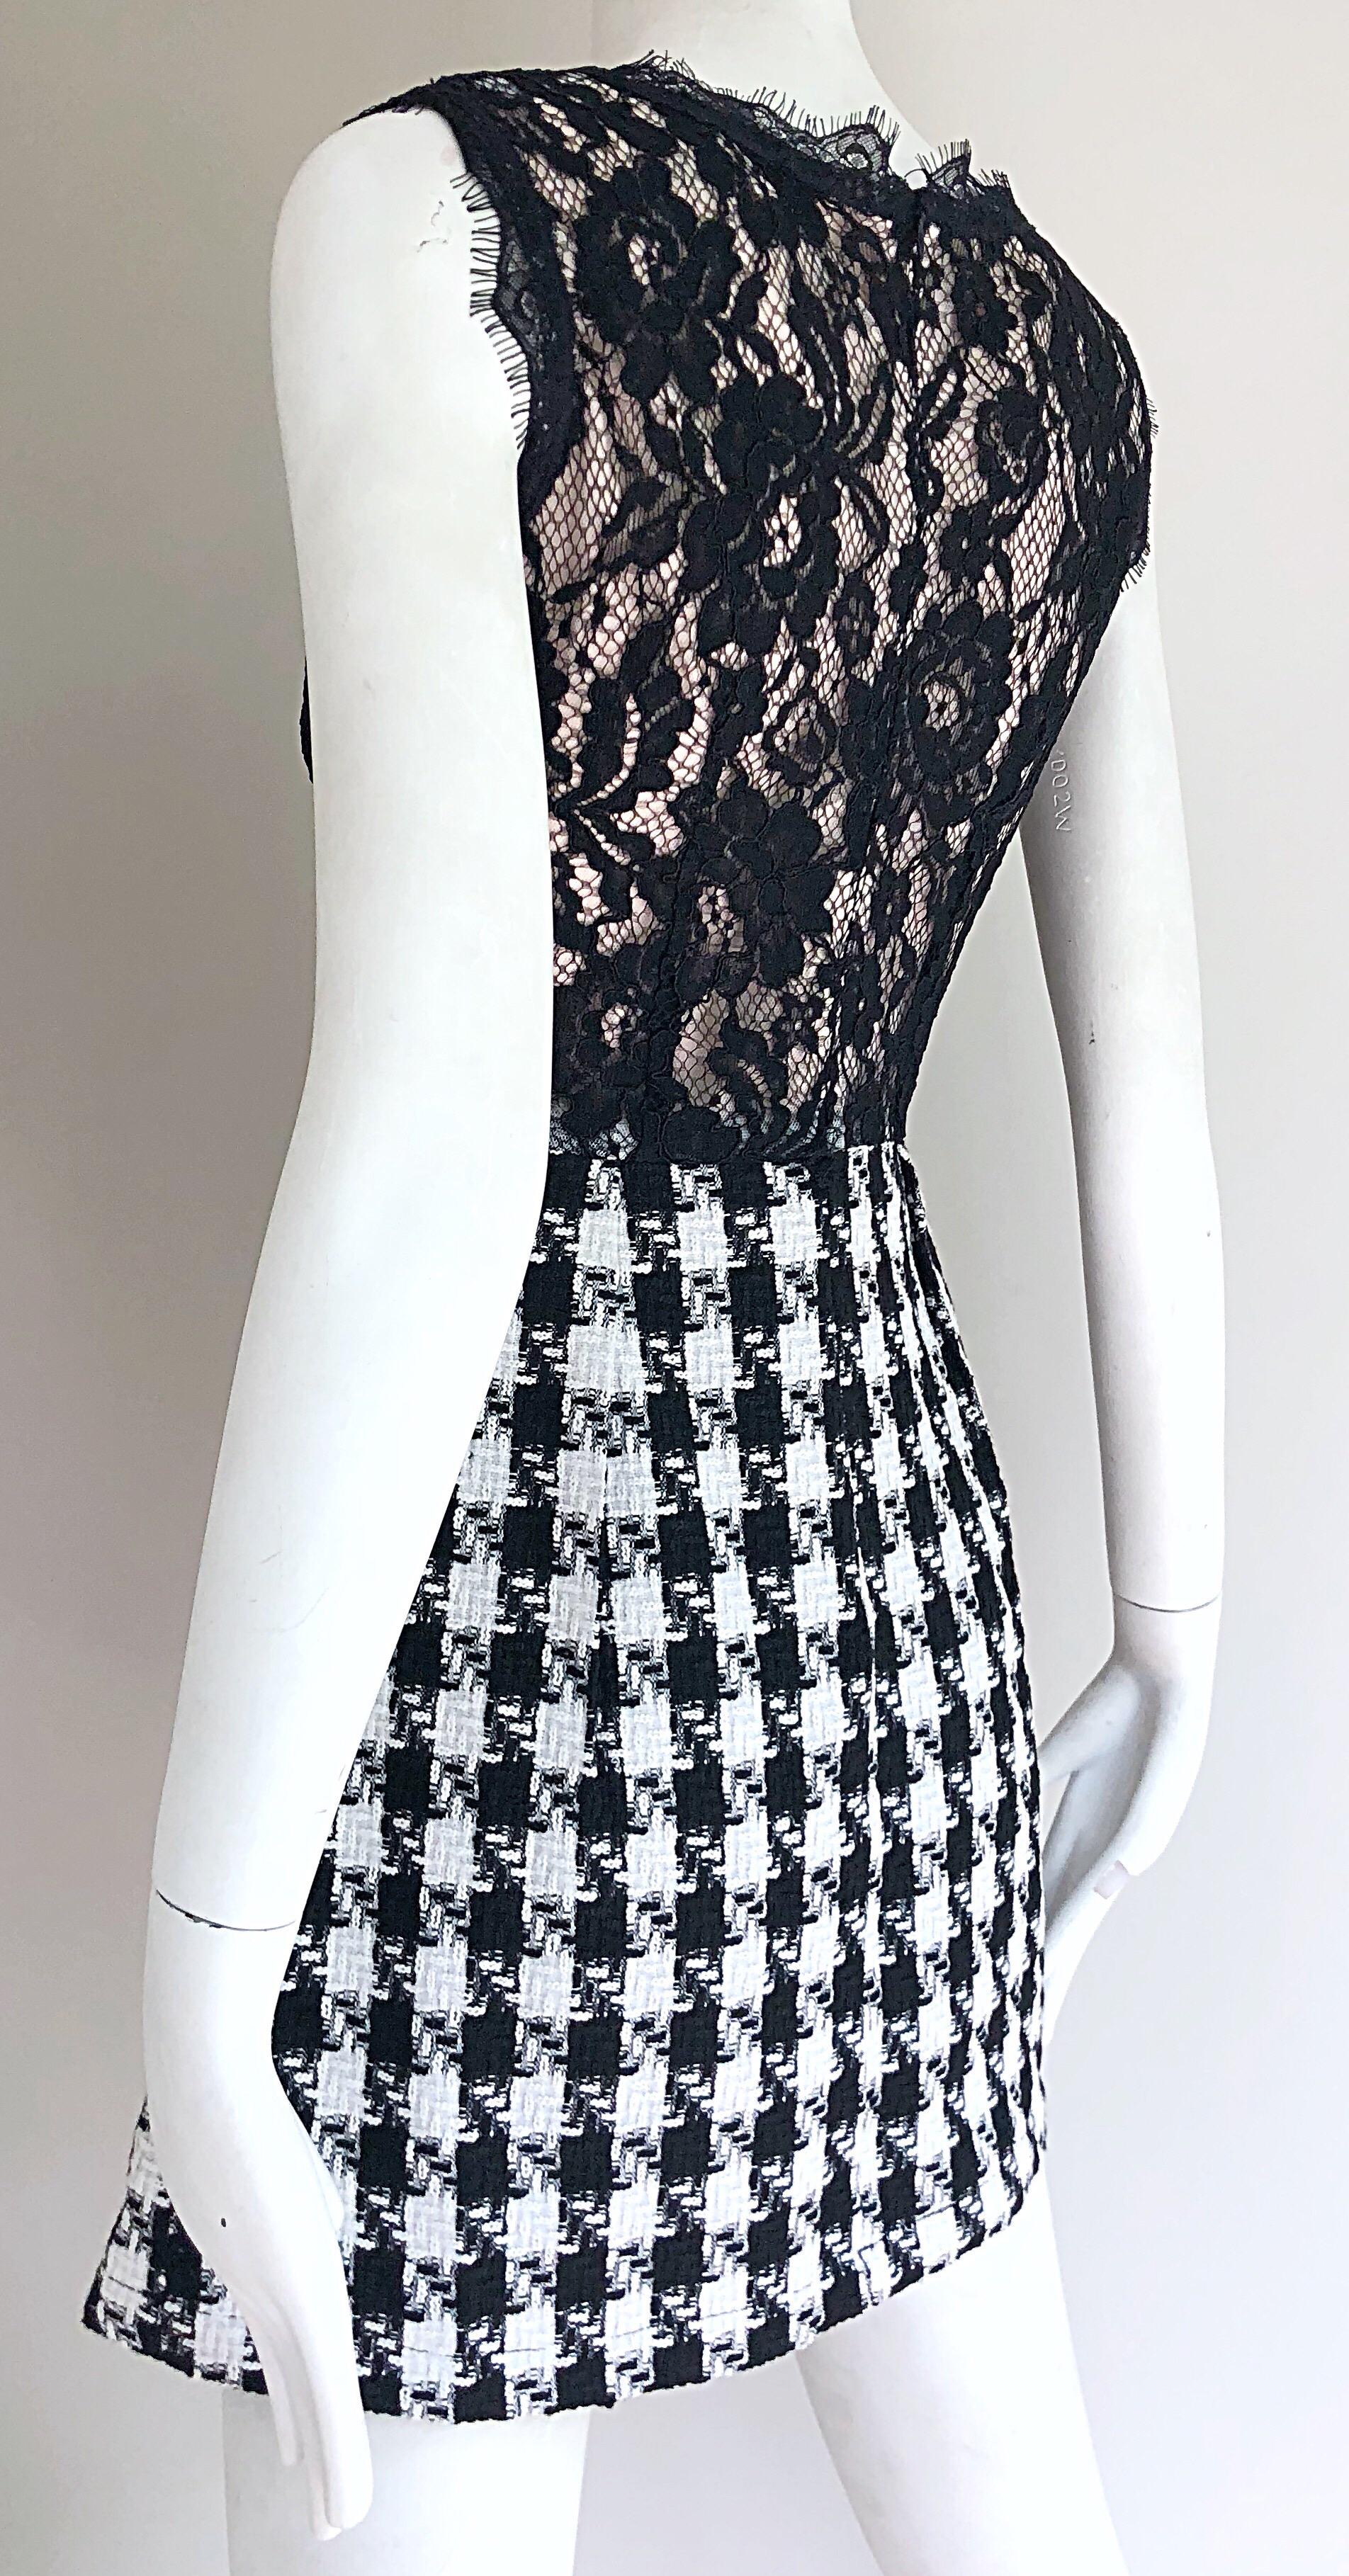 Marc Jacobs Early 2000s Black and White Lace Houndstooth Checkered Mini Dress For Sale 2